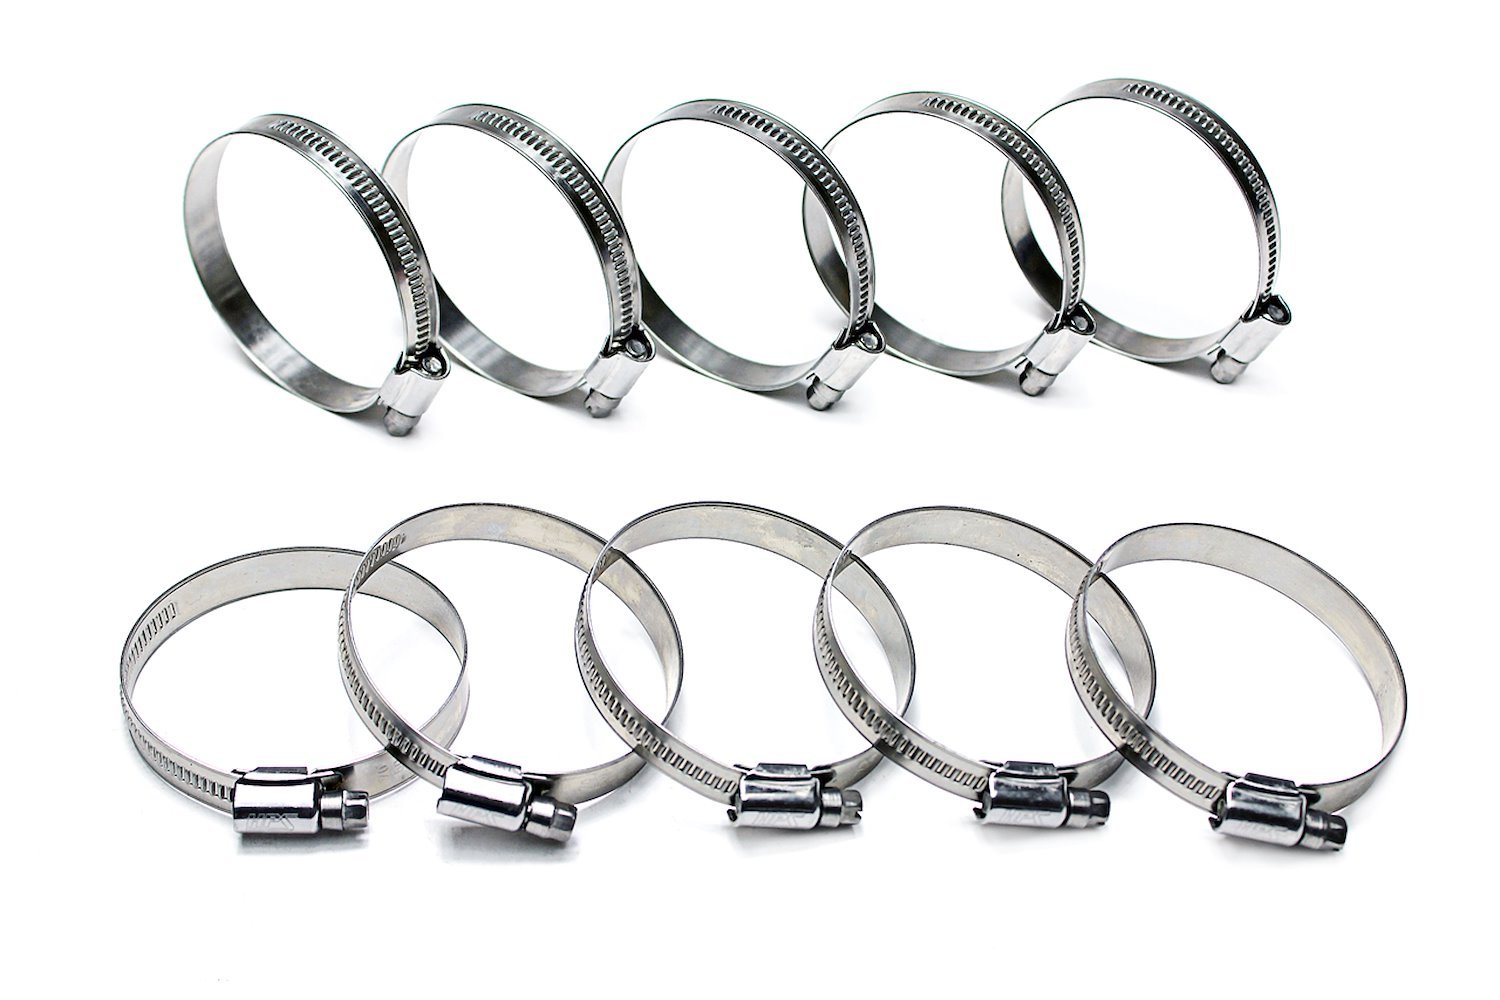 EMSC-8-12x10 Embossed Hose Clamp, Stainless Steel Embossed Hose Clamp, Size #3, Effective Range: 5/16 in.- 9/16 in., 10Pc